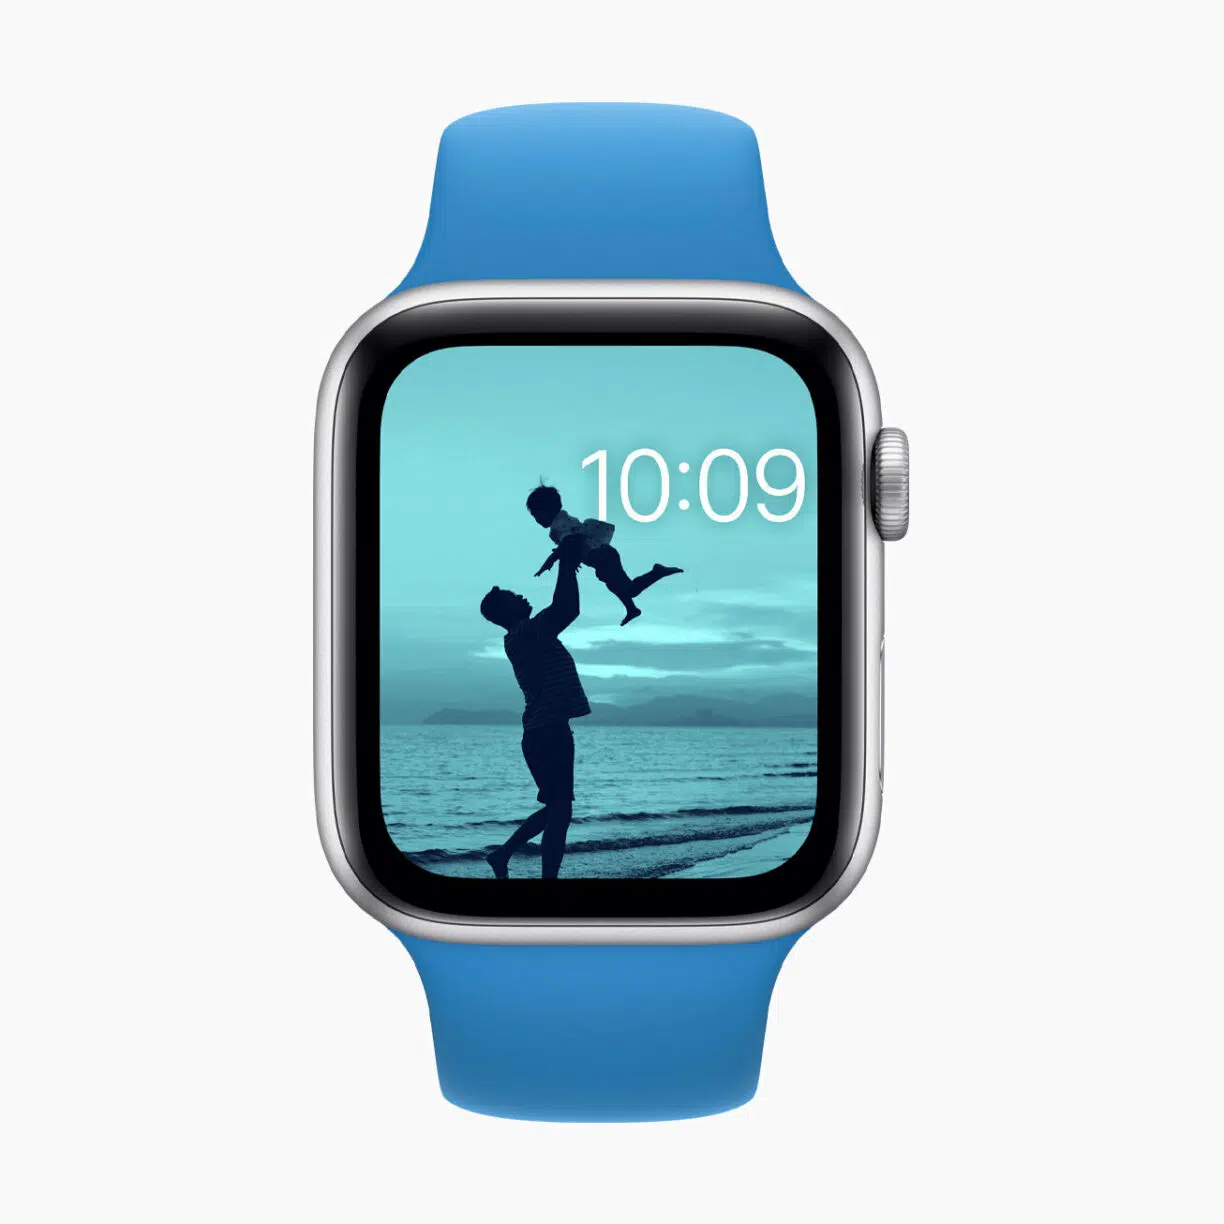 Apple watch watchos7 photo face filters 06222020